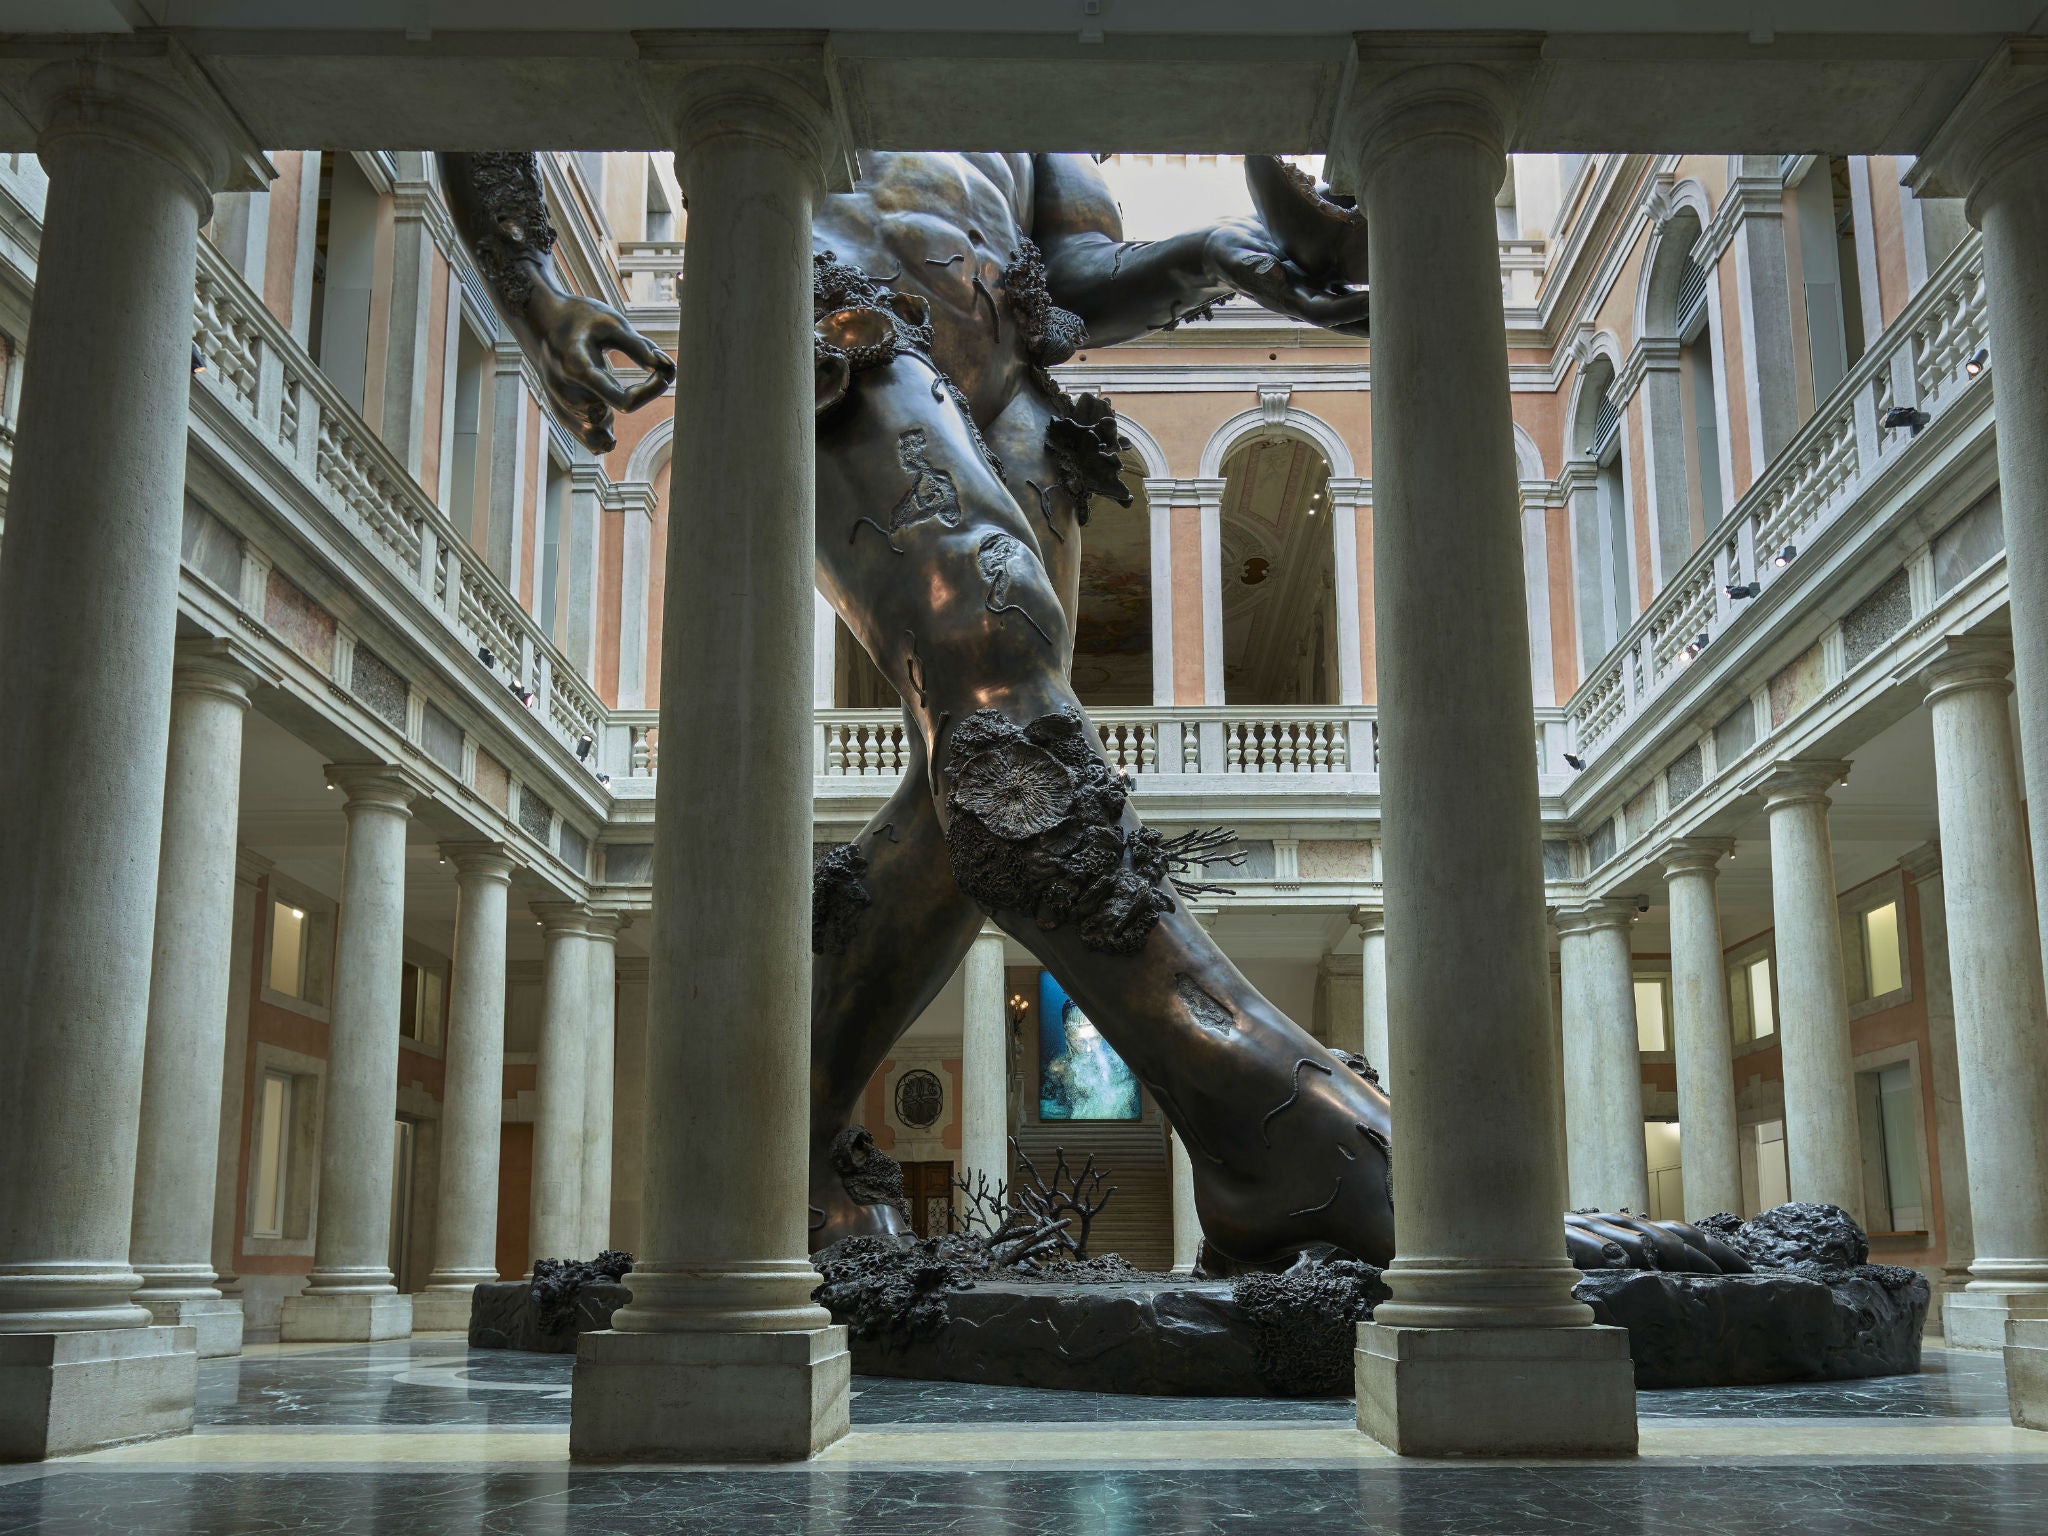 Damien Hirst’s ‘Demon with Bowl’ In the large atrium of Venice's Palazzo Grassi